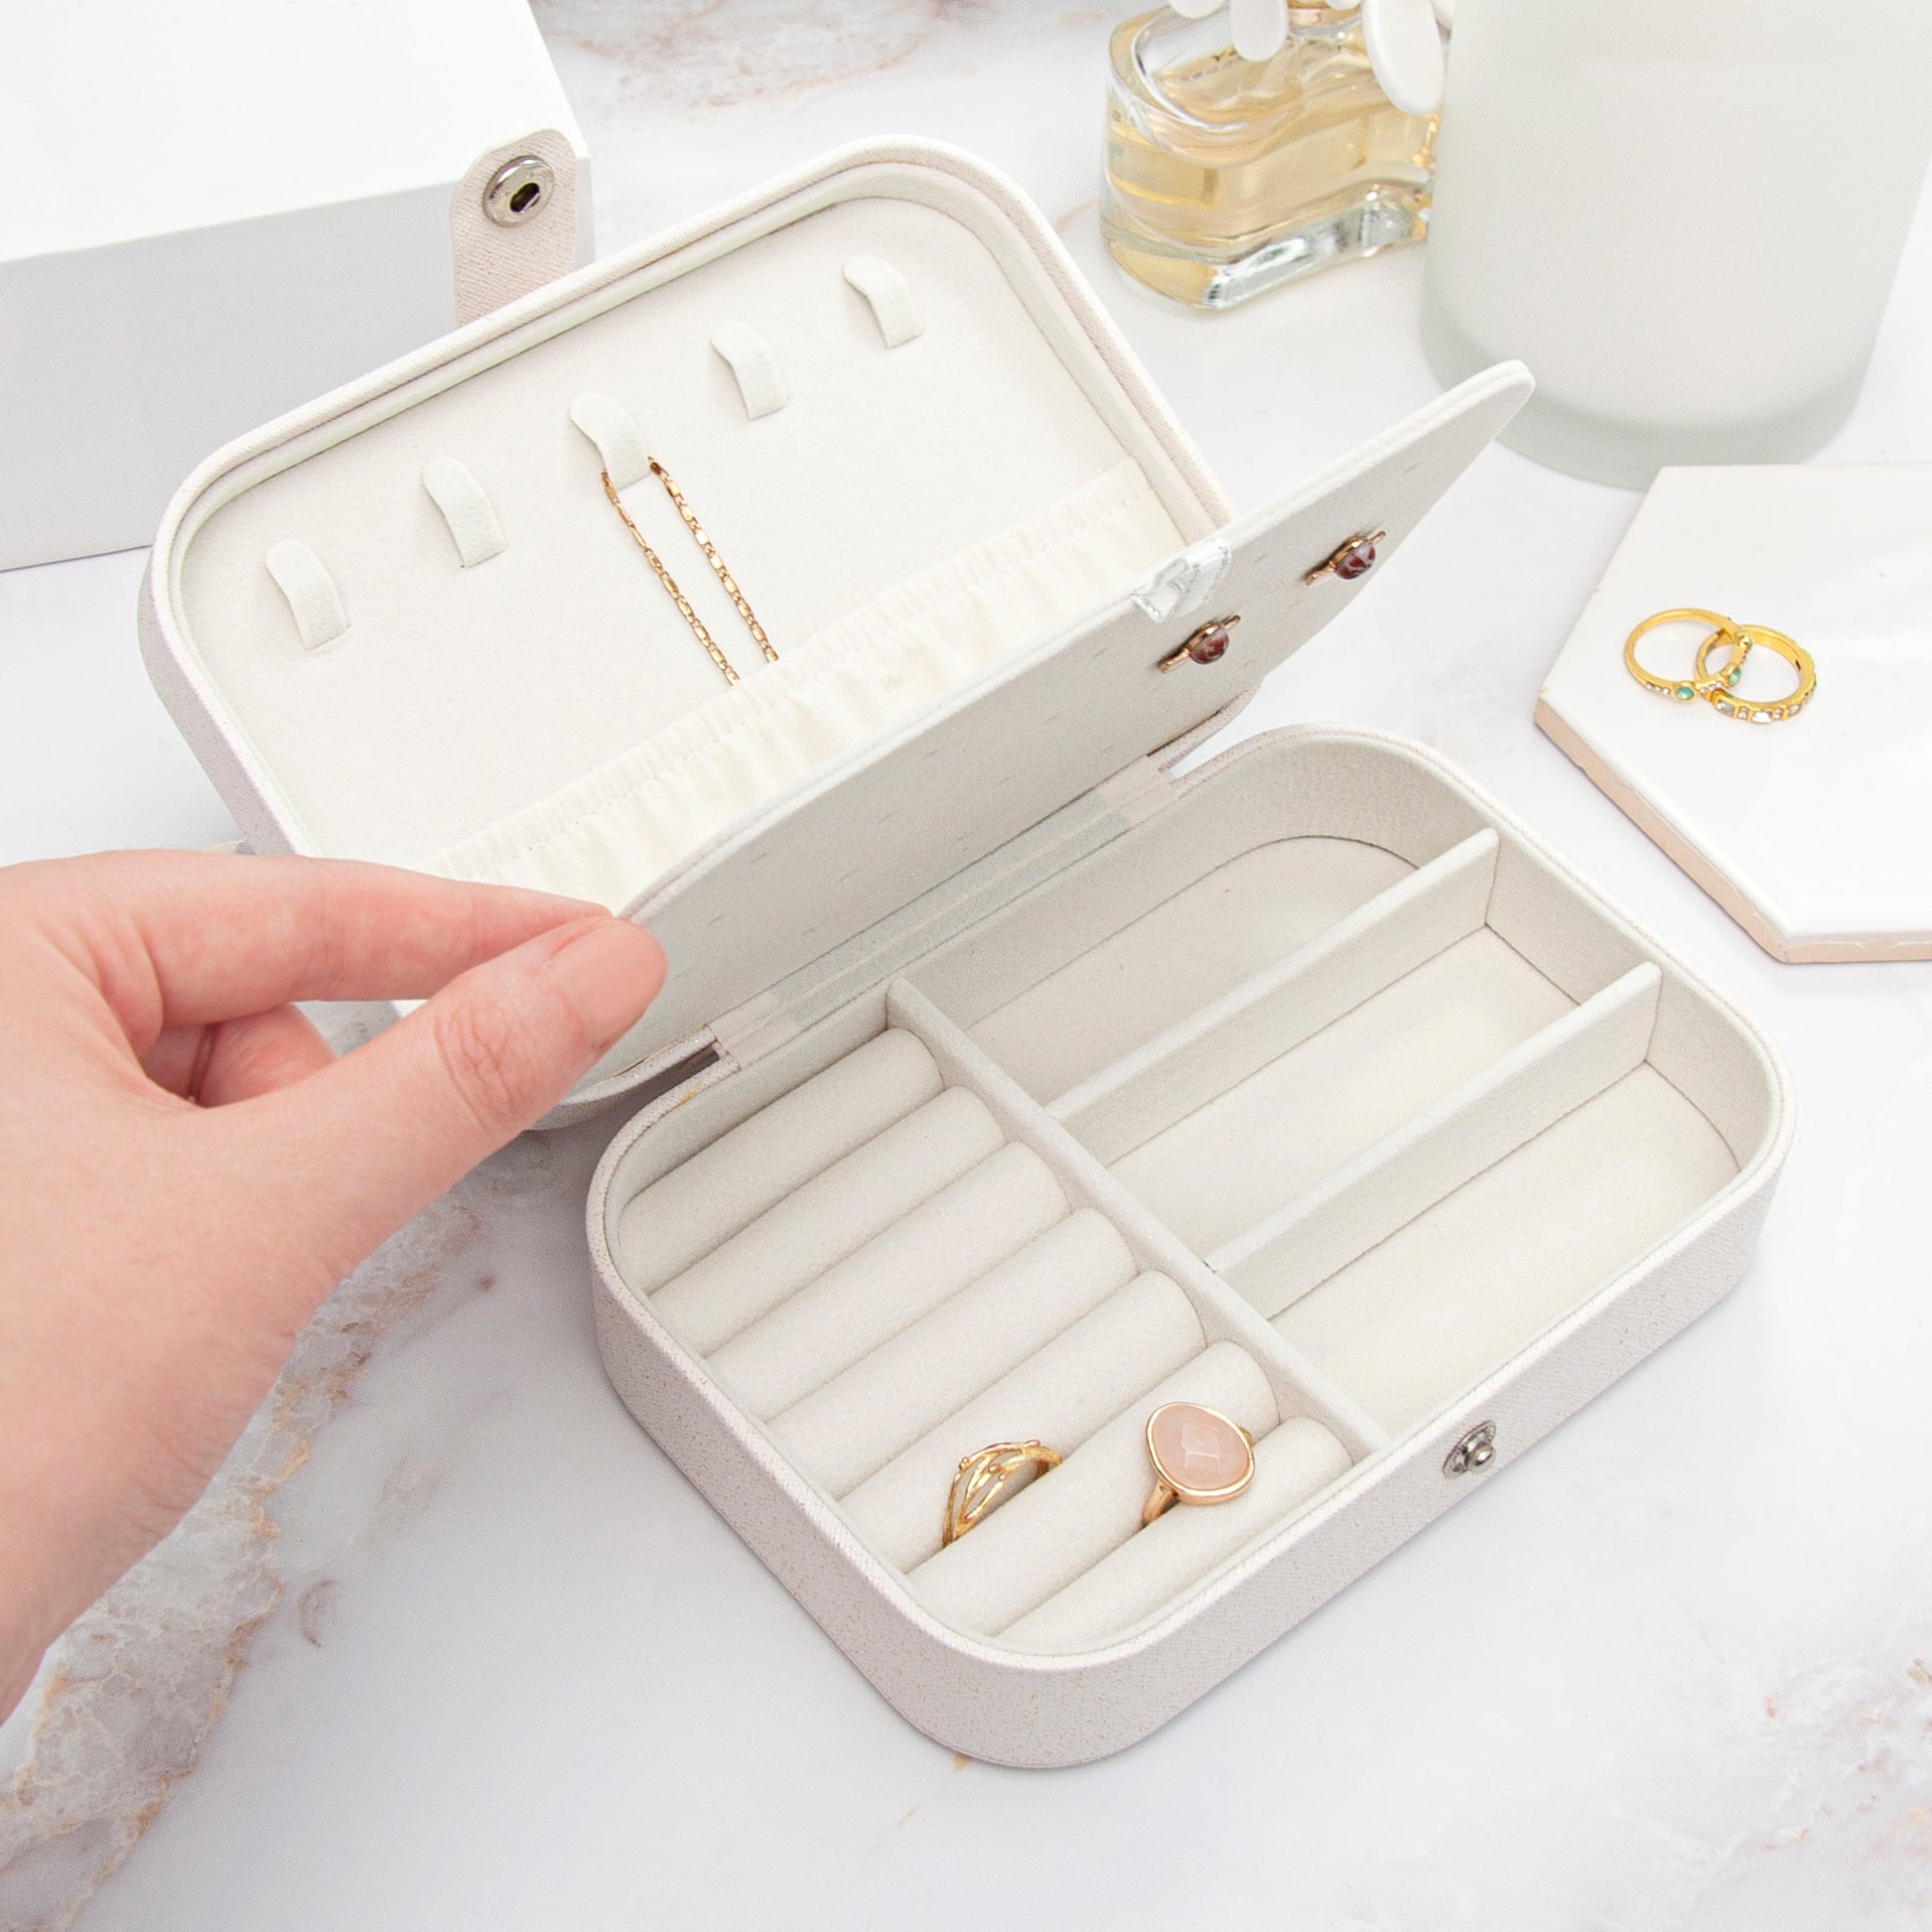 Personalized Jewellery Boxes & Storage - Personalized Travel Jewellery Case 